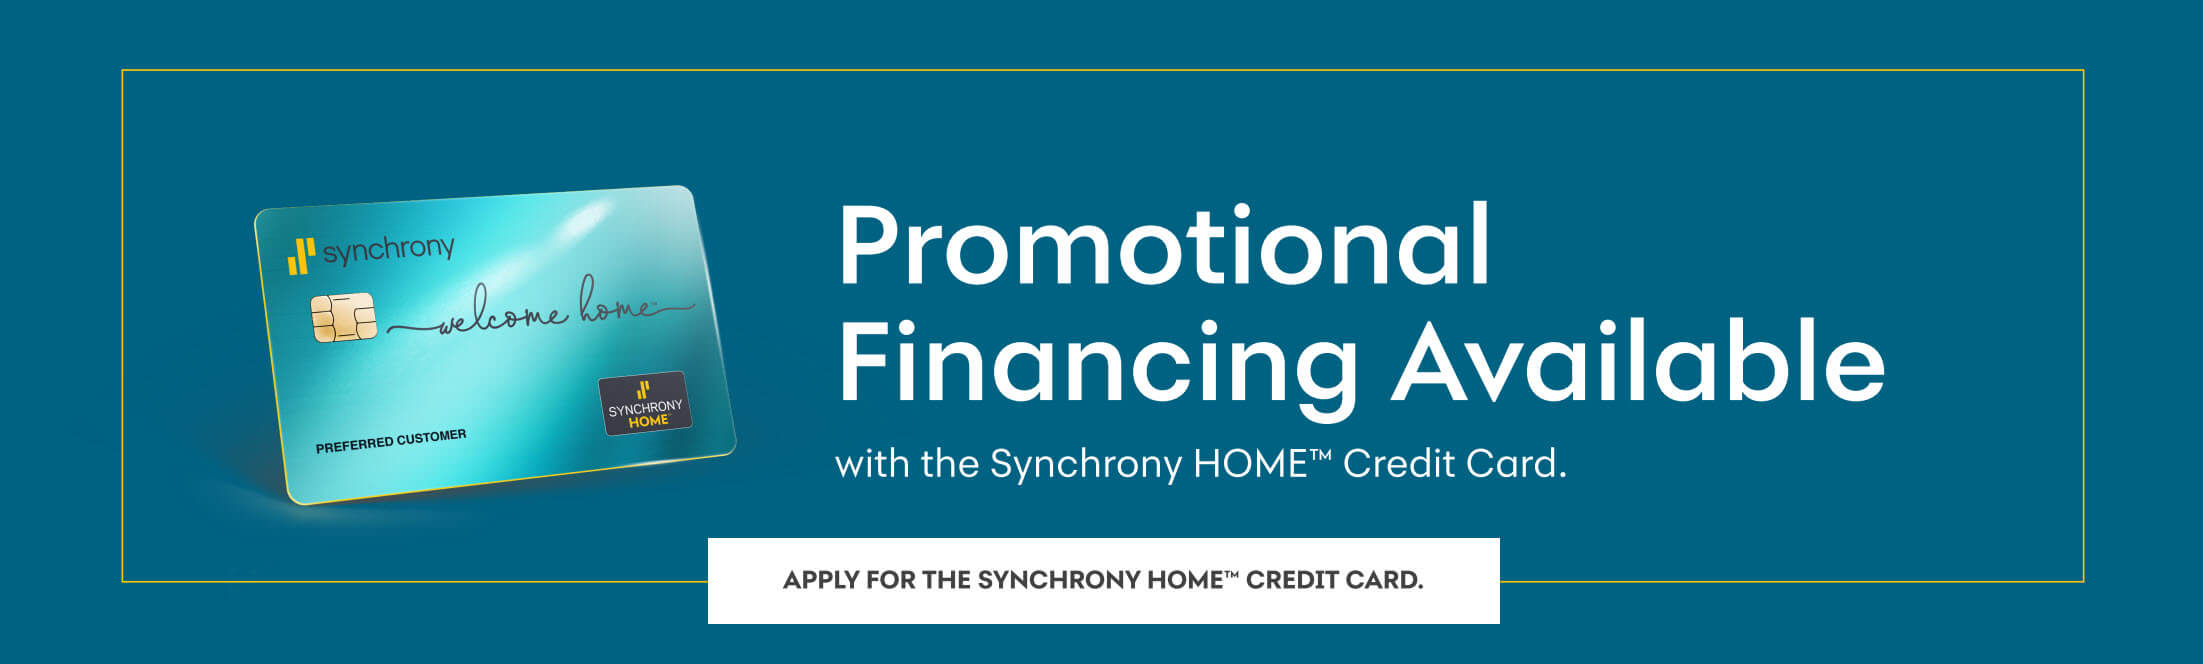 Synchrony - Contact Store to Apply 